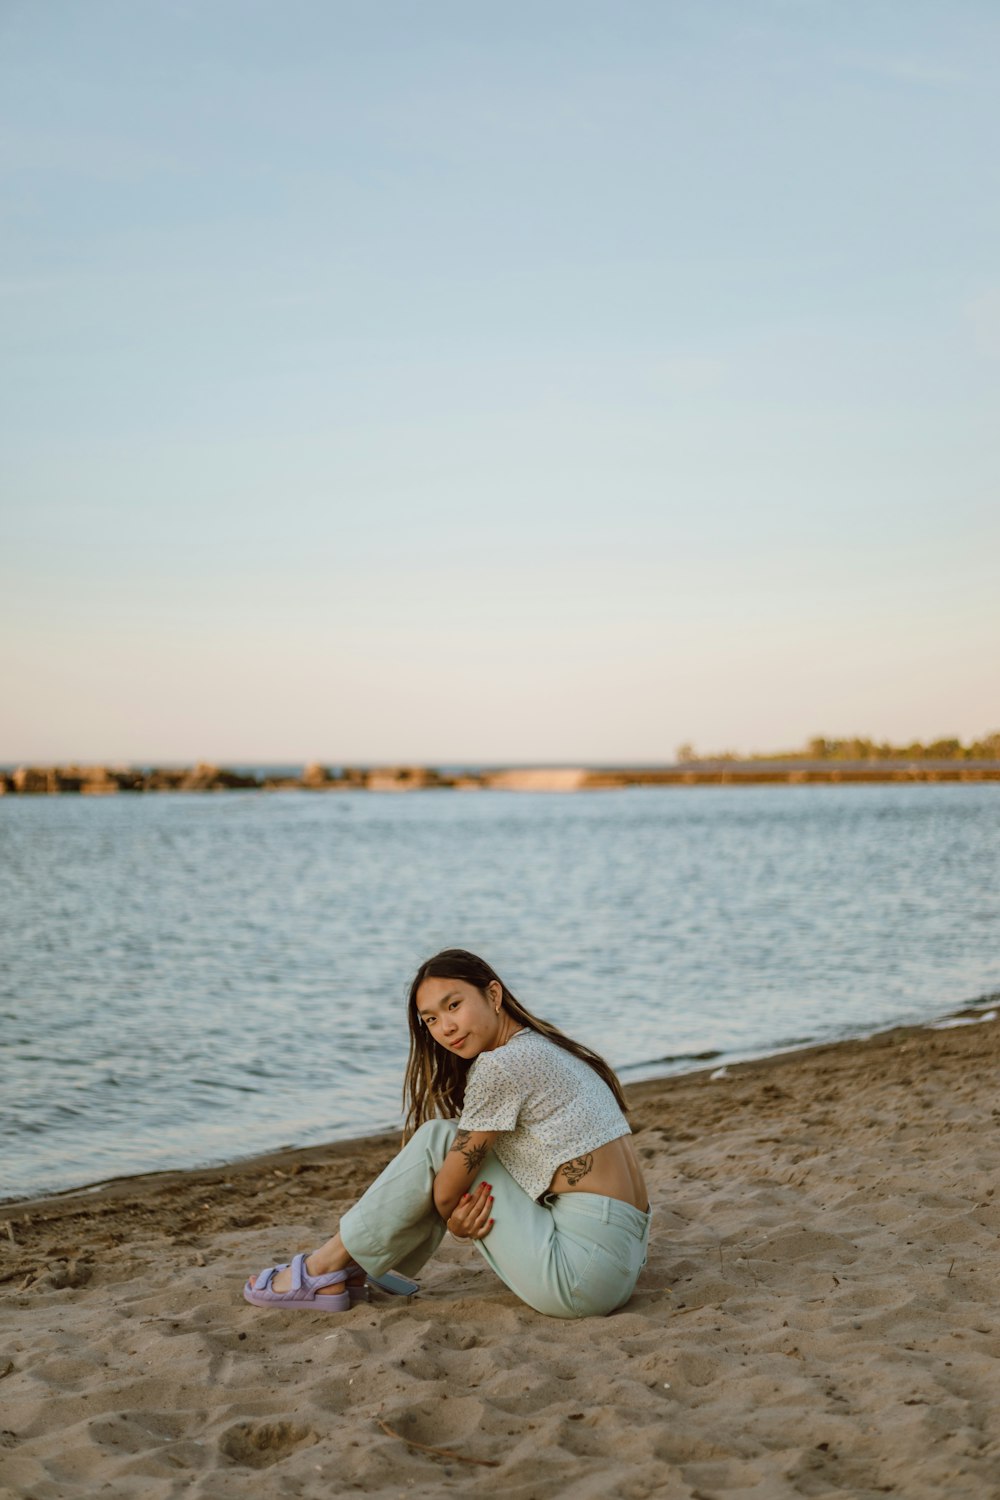 a woman sitting on a beach next to a body of water